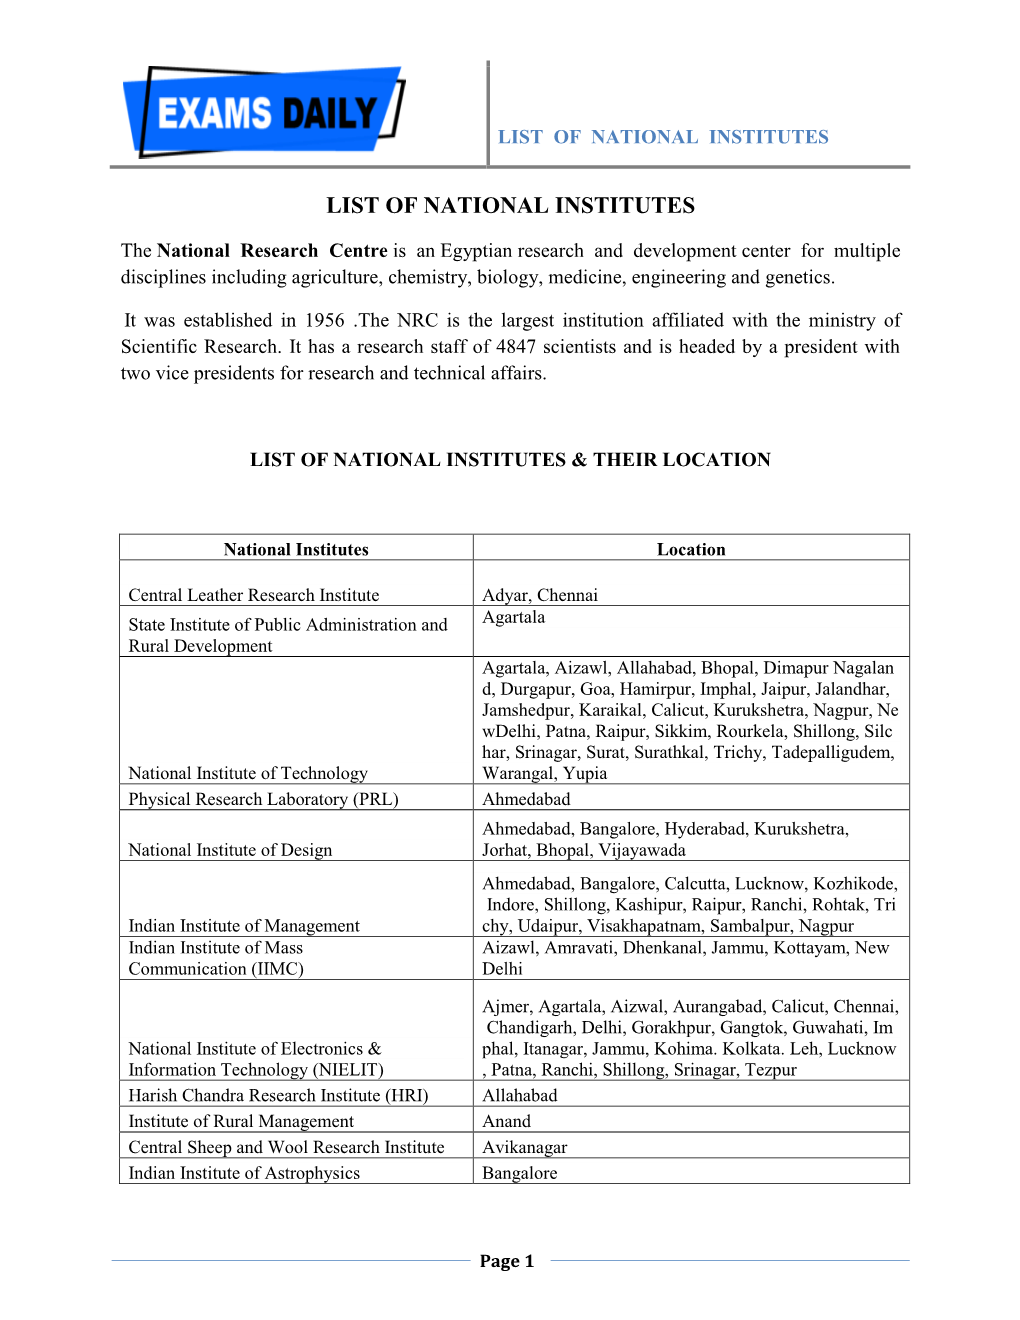 List of National Institutes